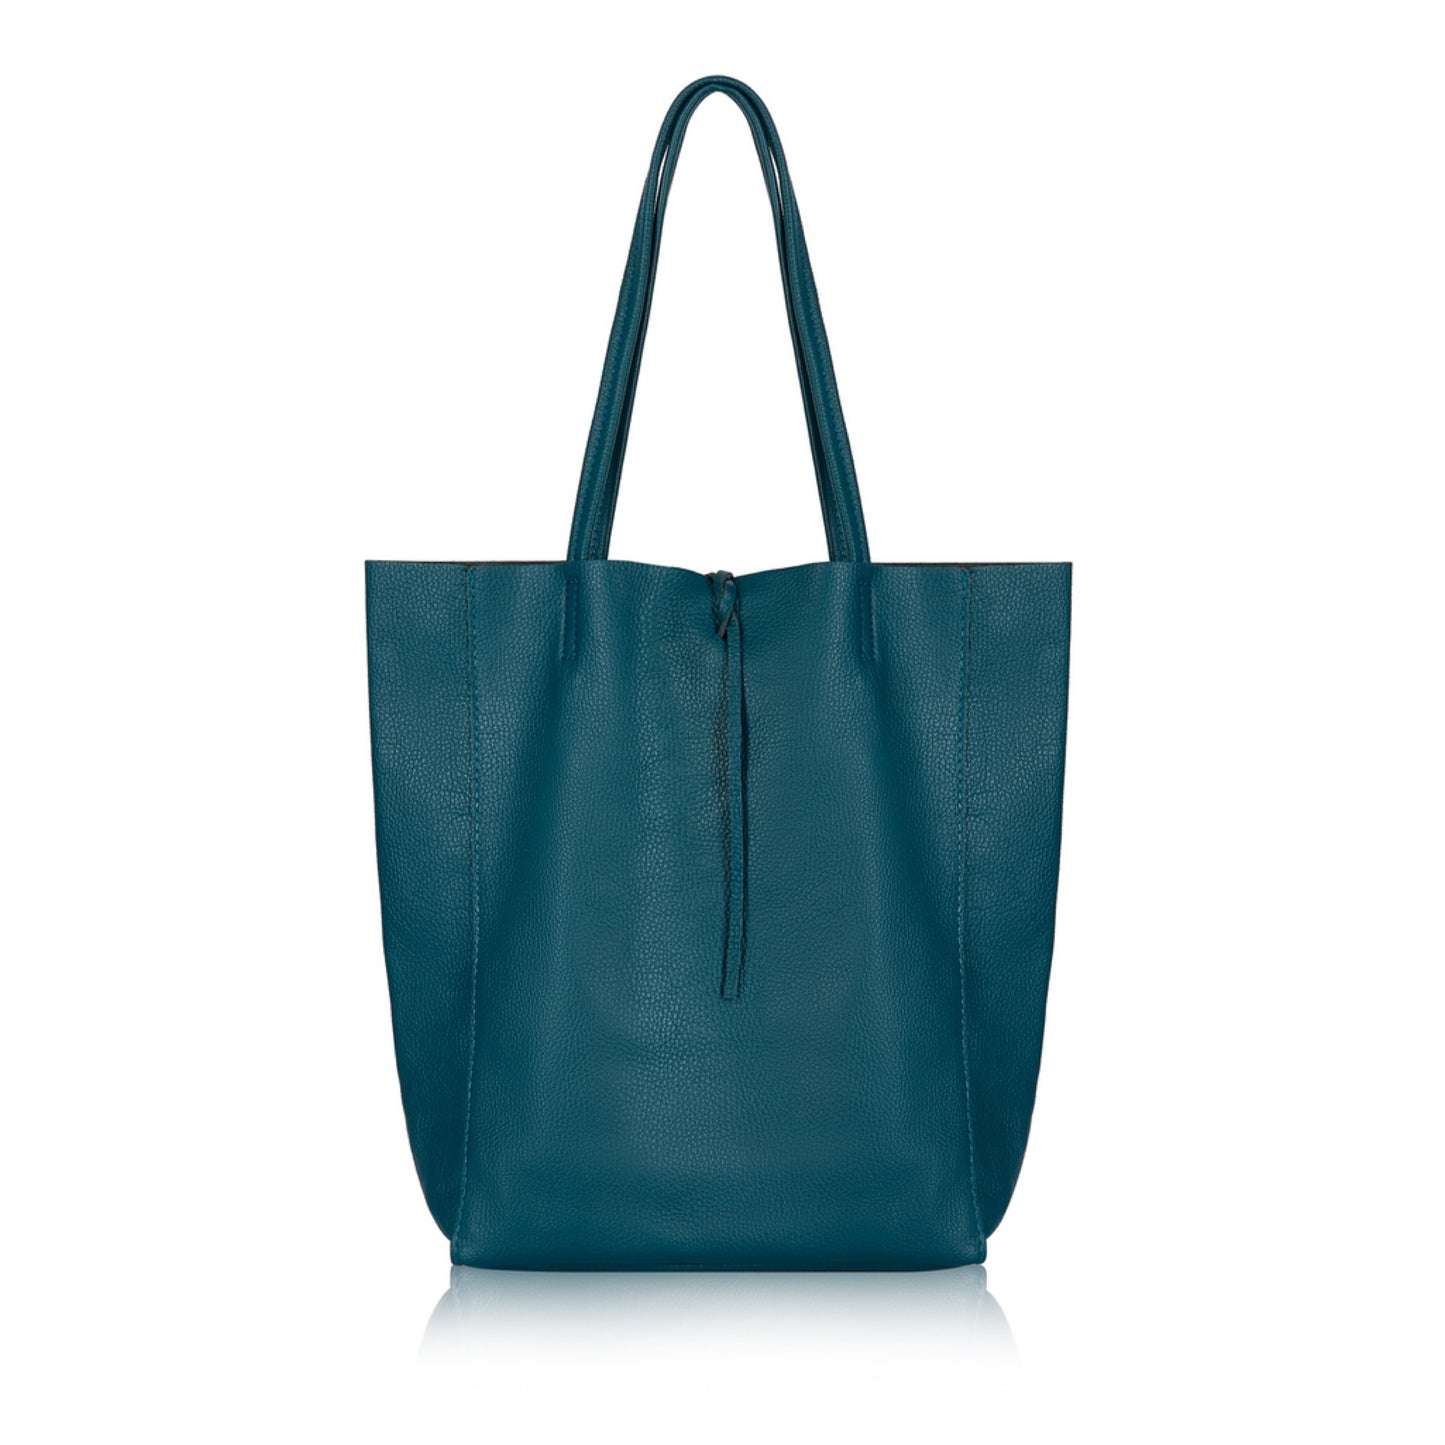 Everly - open top leather shopper